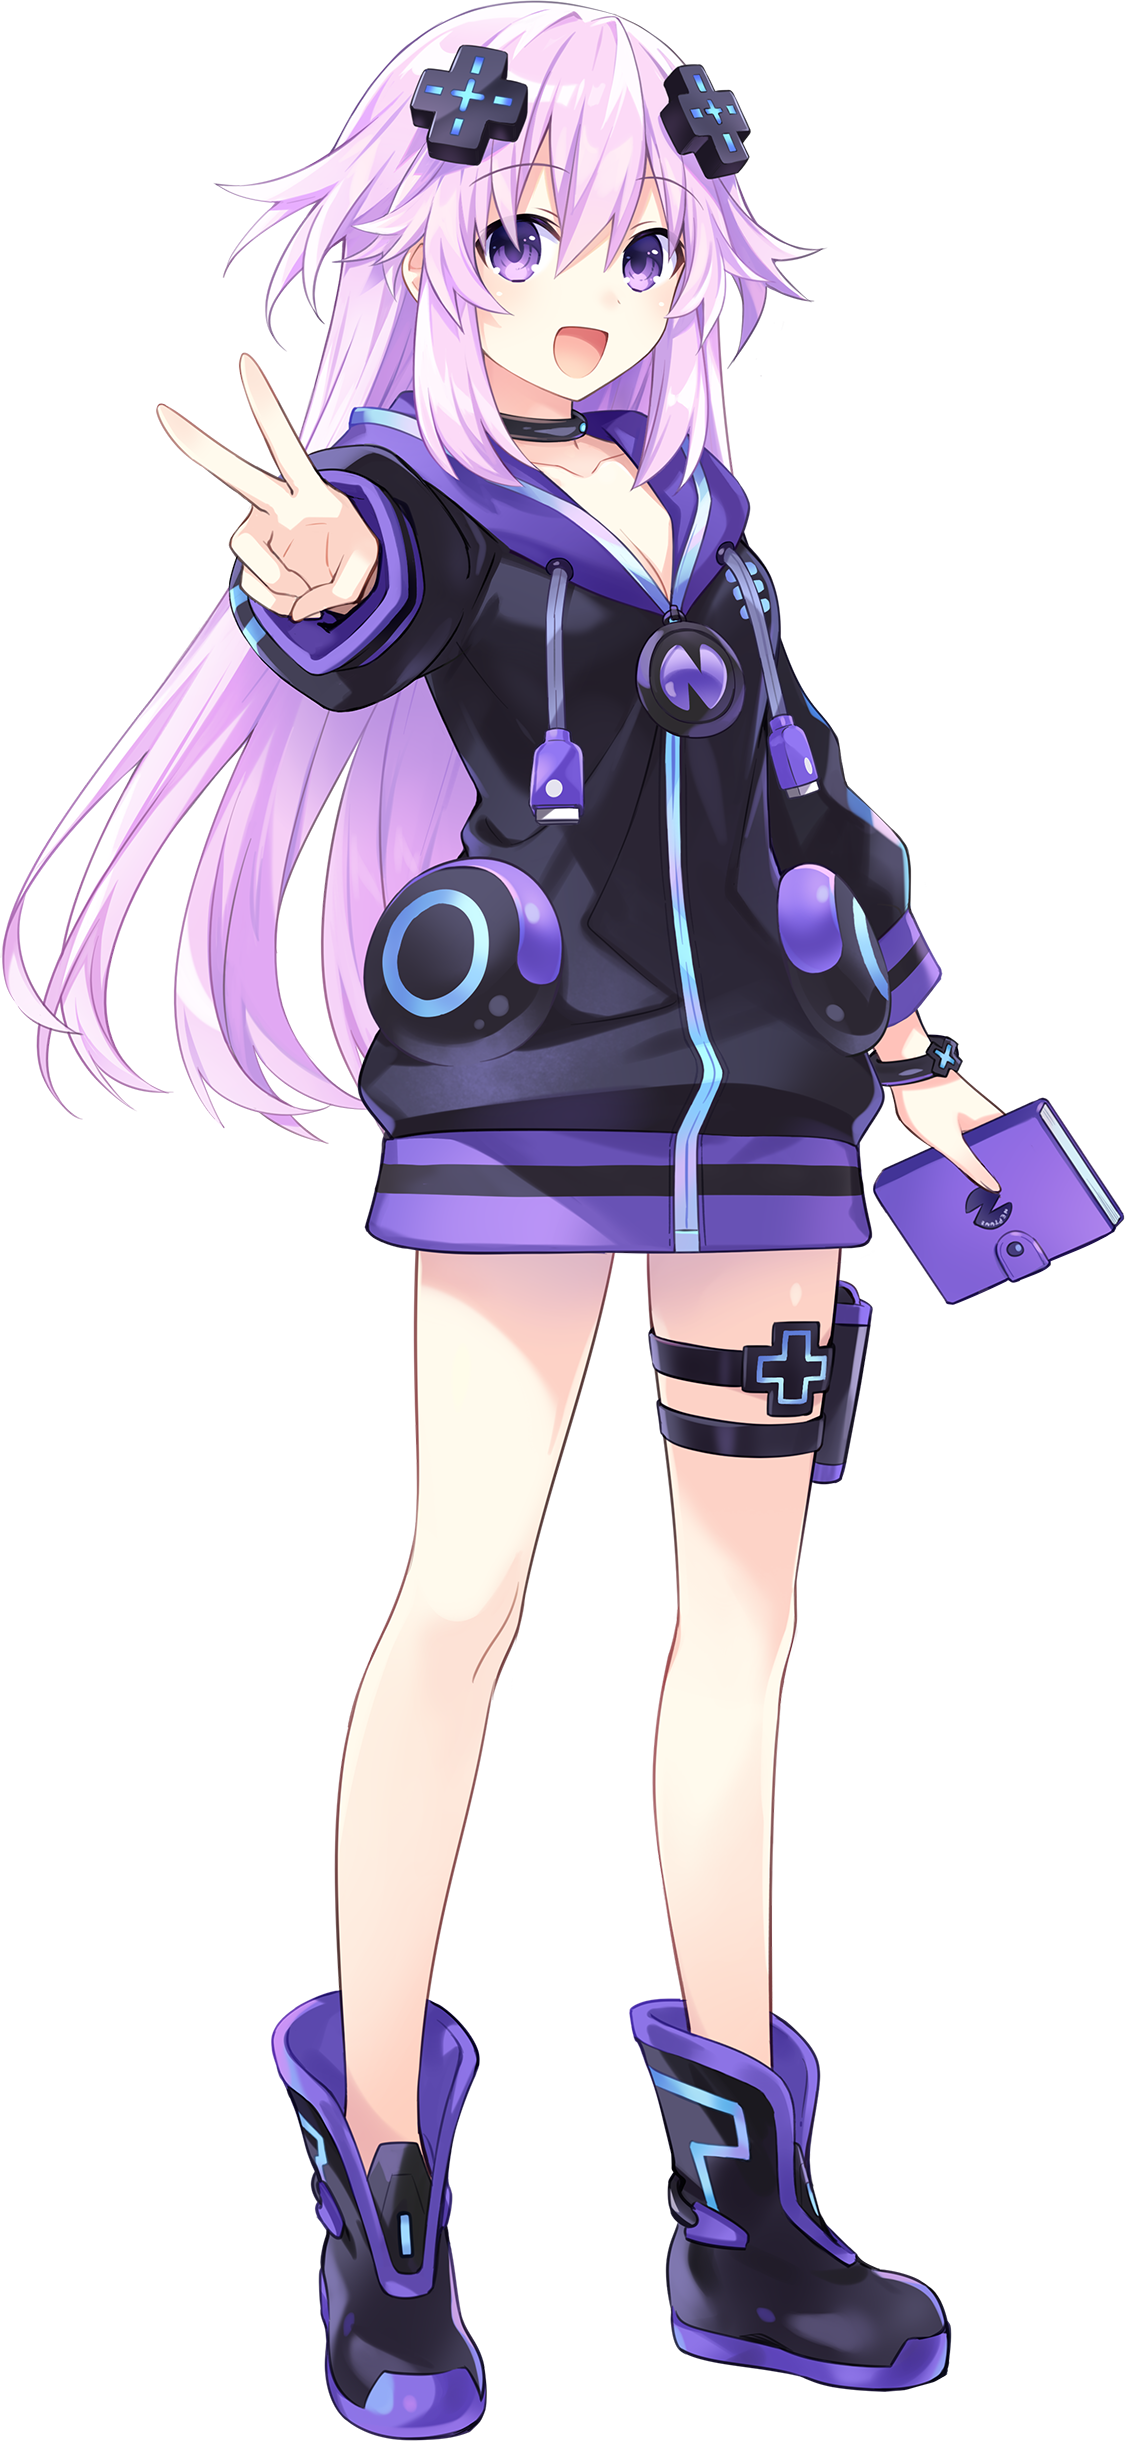 Noire: uh Neptune, why would you ever think i would love you? We have  nothing in common. You are a lazy, dim, doofus. Opposites don't really  attract in real life neptune. :